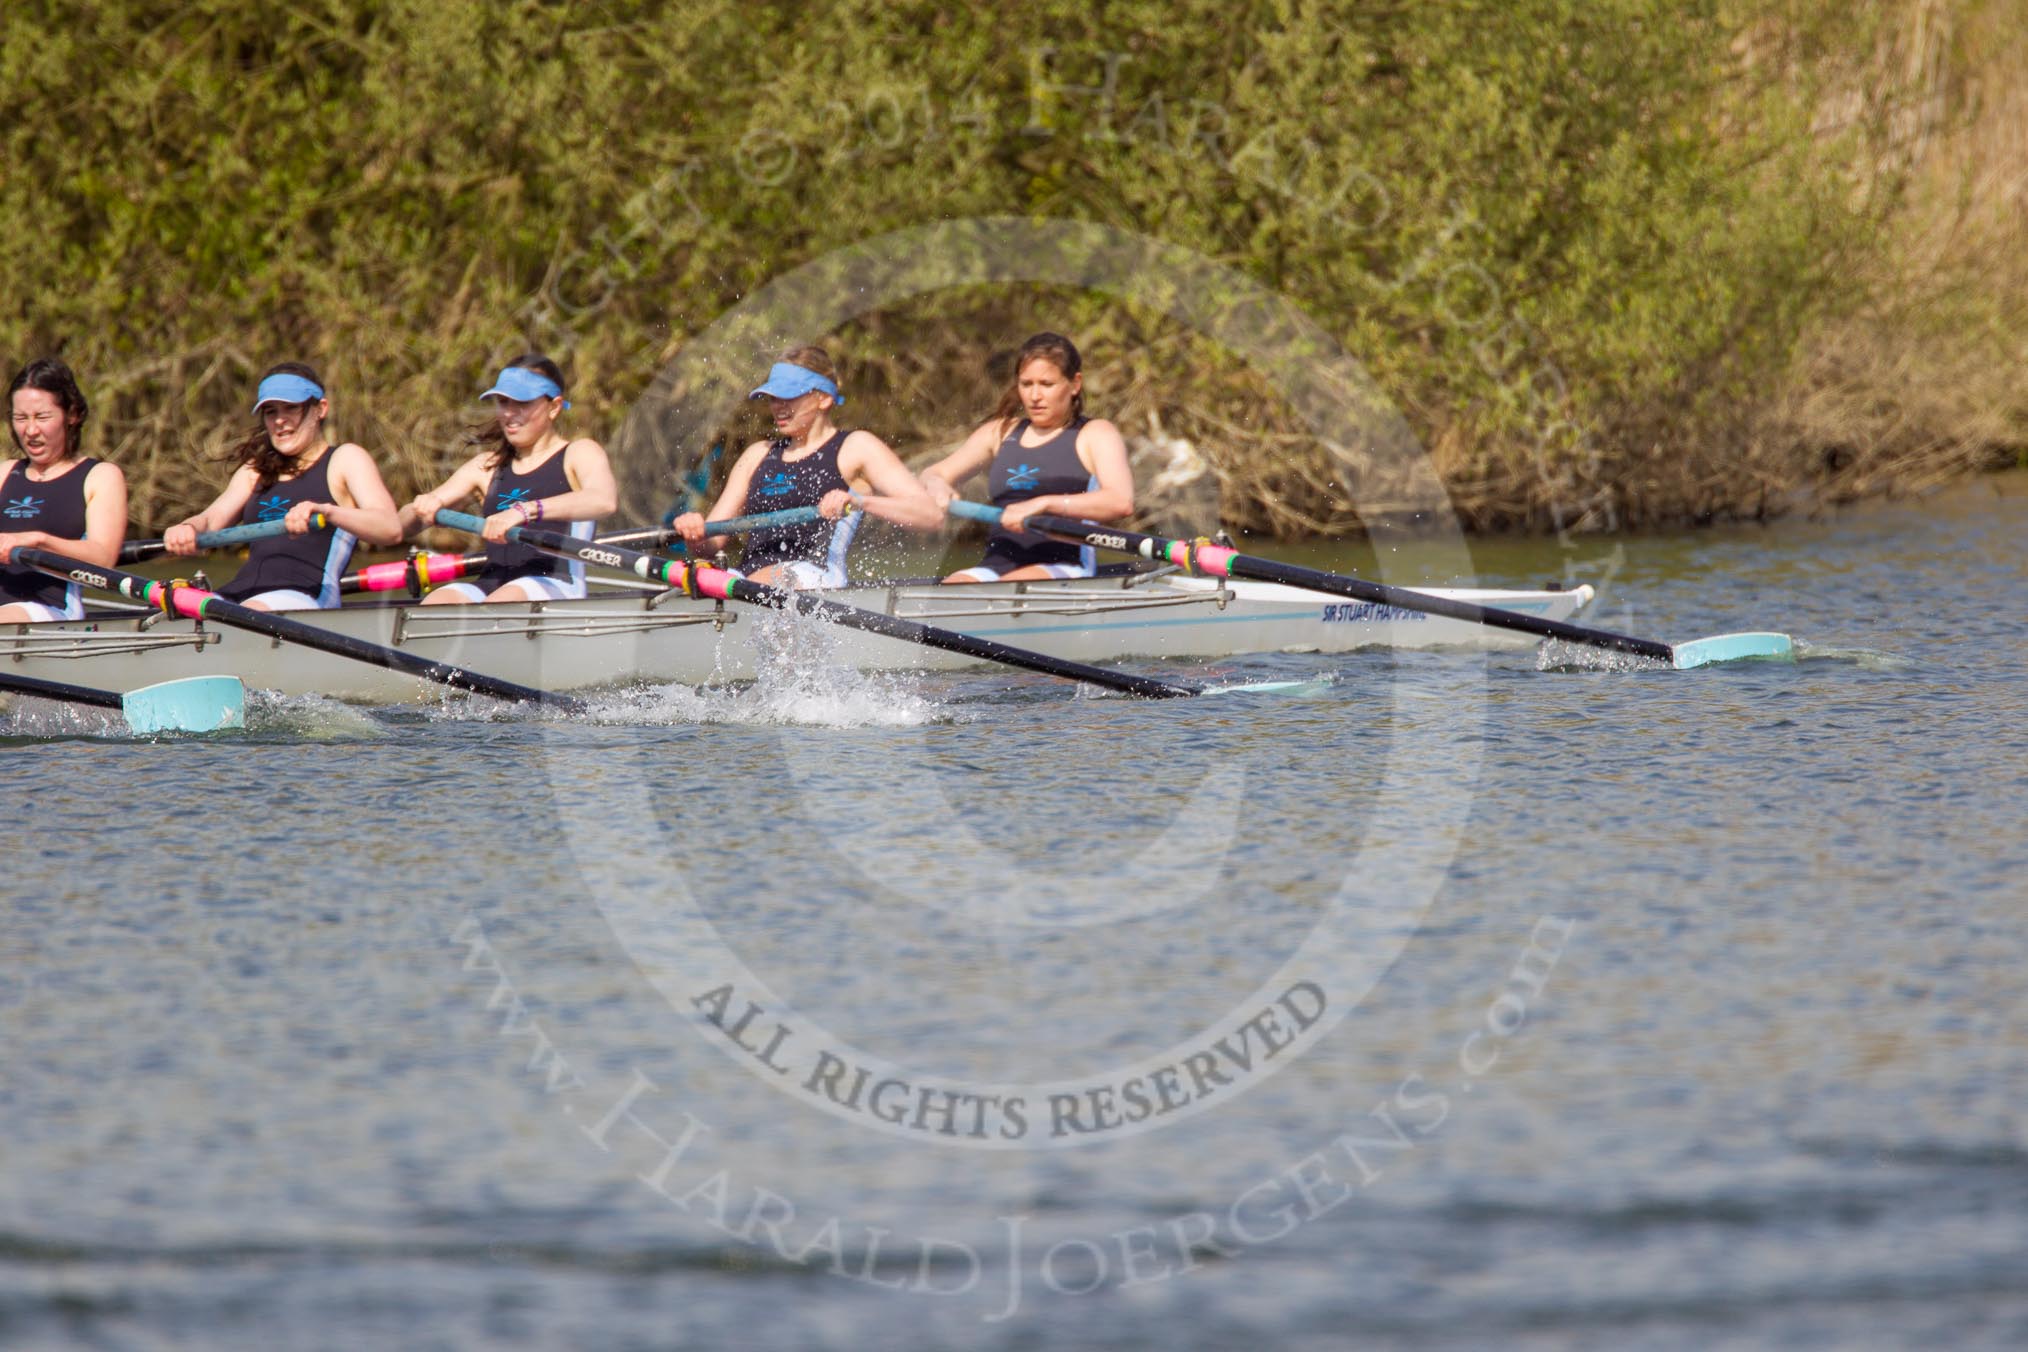 The Women's Boat Race and Henley Boat Races 2014: The Intercollegiate women's race. The Wadham College (Oxford) boat in the lead..
River Thames,
Henley-on-Thames,
Buckinghamshire,
United Kingdom,
on 30 March 2014 at 13:27, image #34